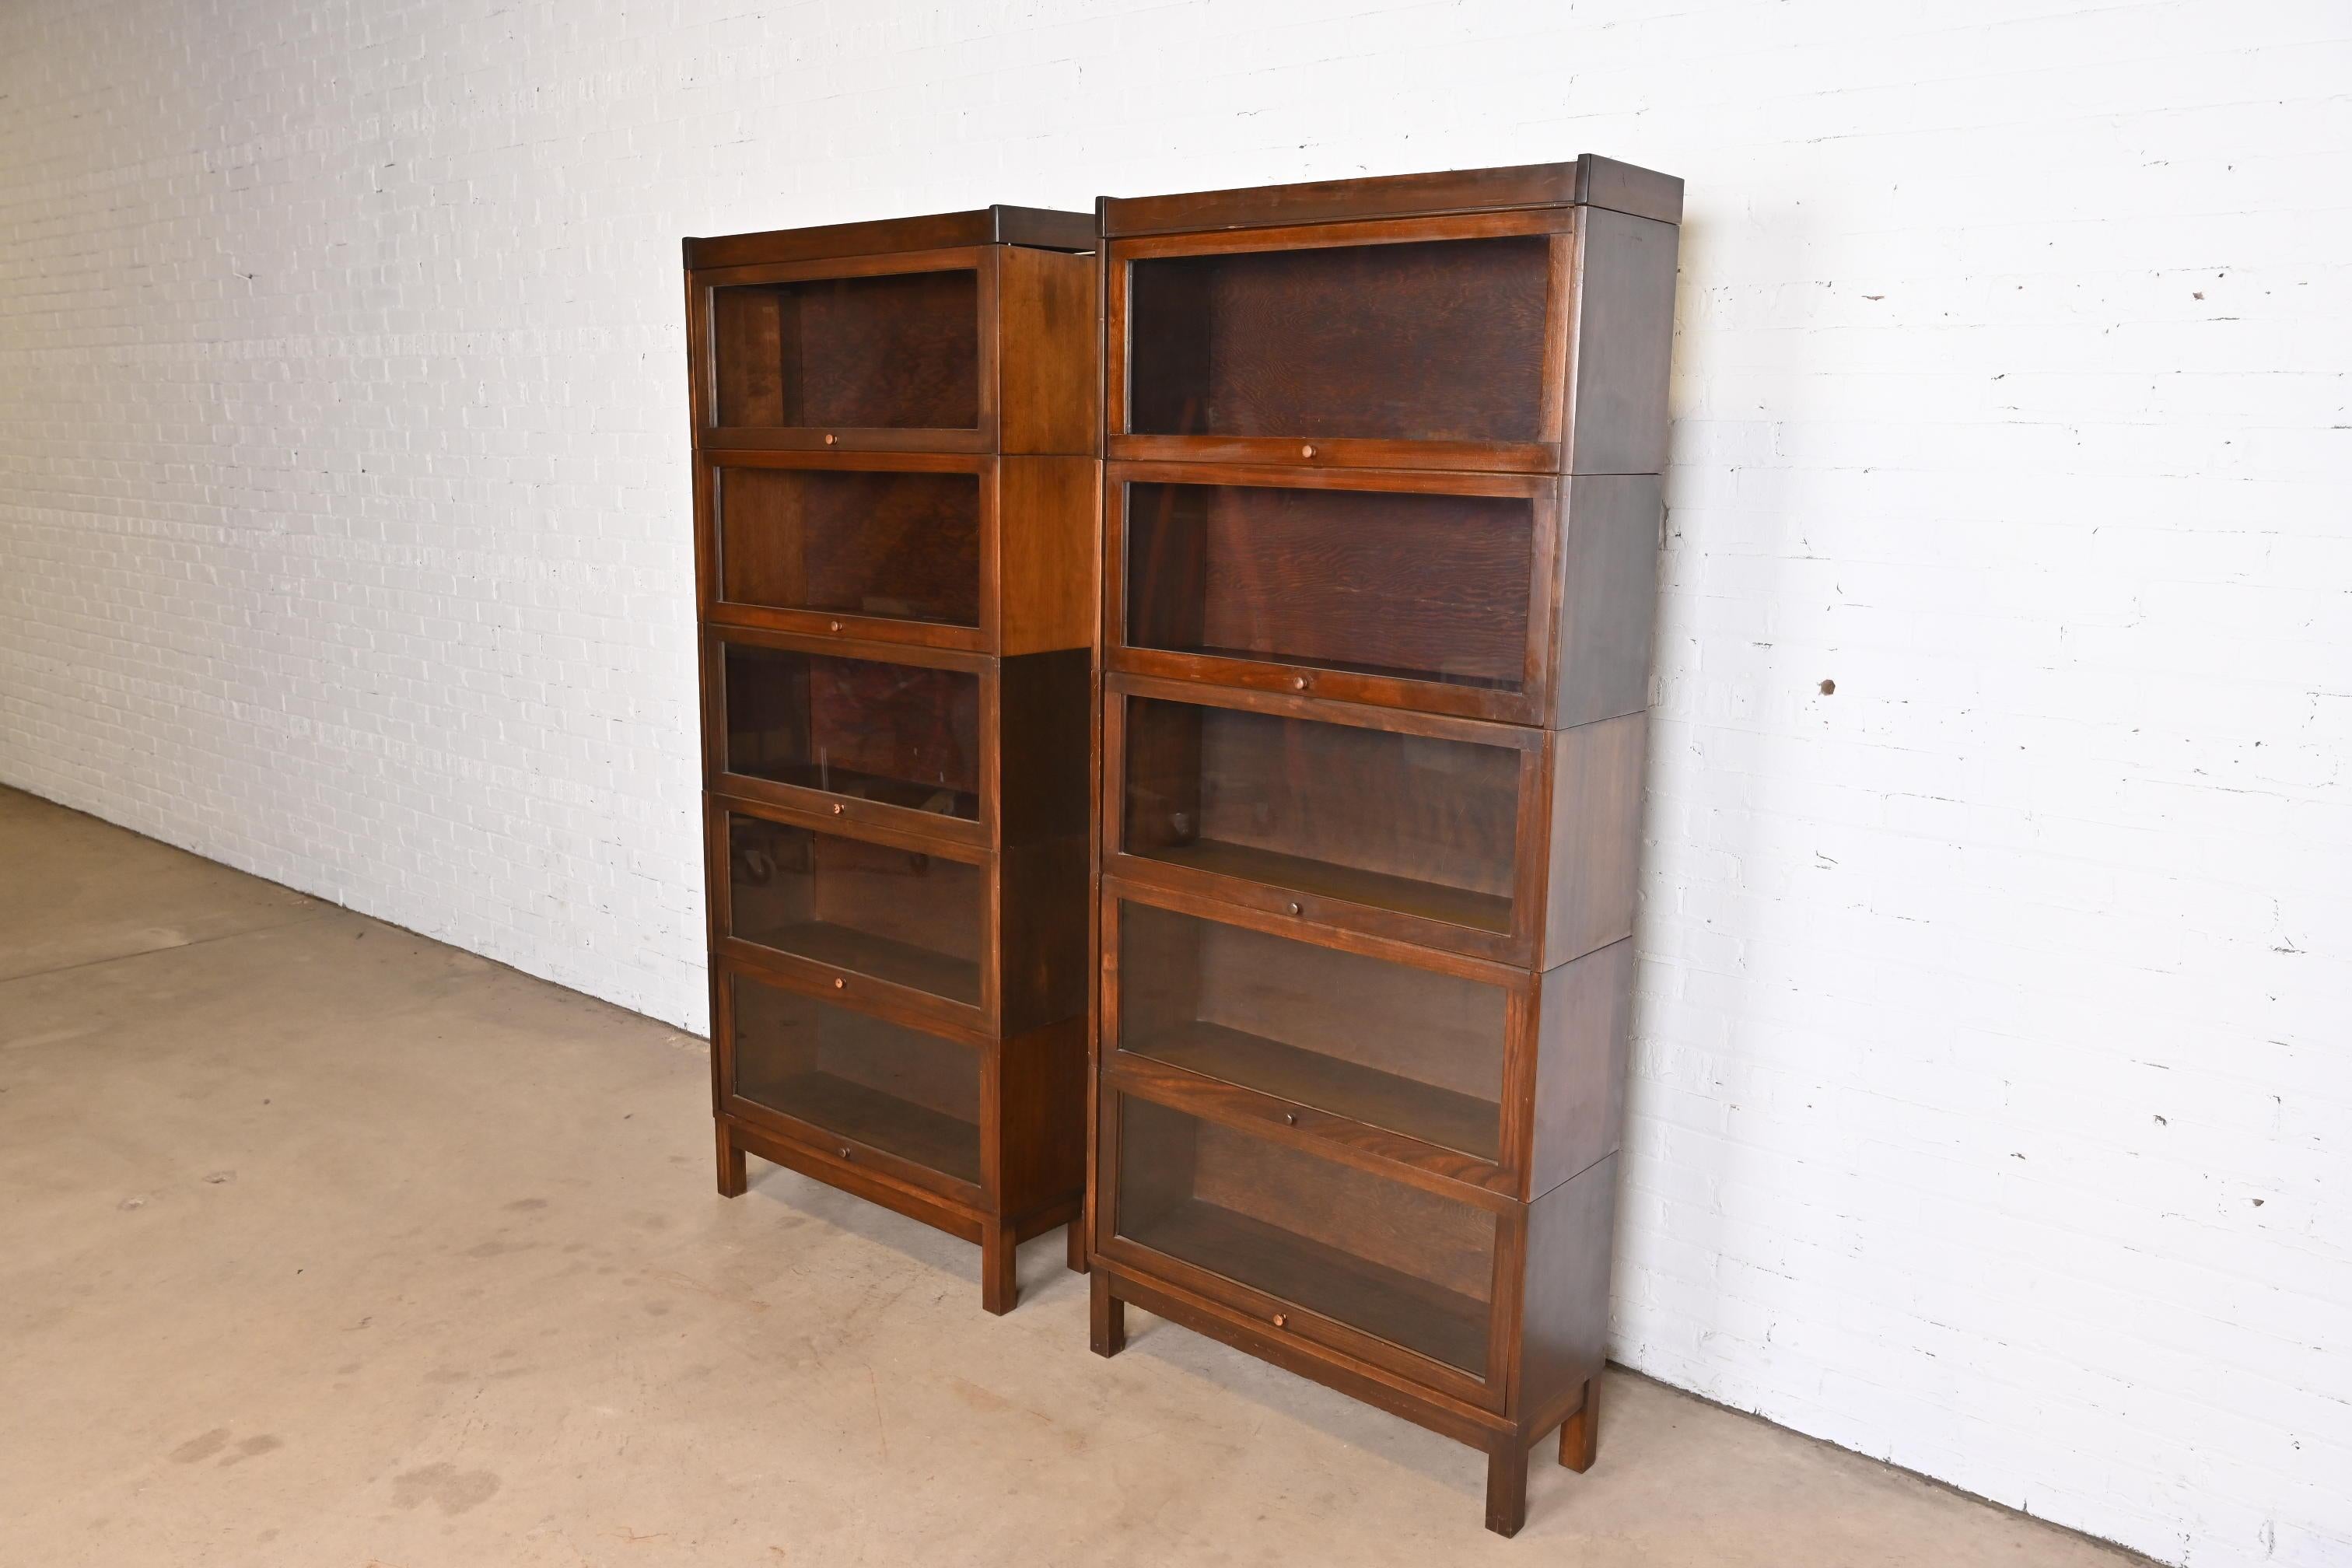 A gorgeous pair of antique Arts & Crafts five-stack barrister bookcases

In the manner of Globe Wernicke

USA, Circa 1920s

Mahogany, with glass front doors.

Each bookcase measures: 33.75